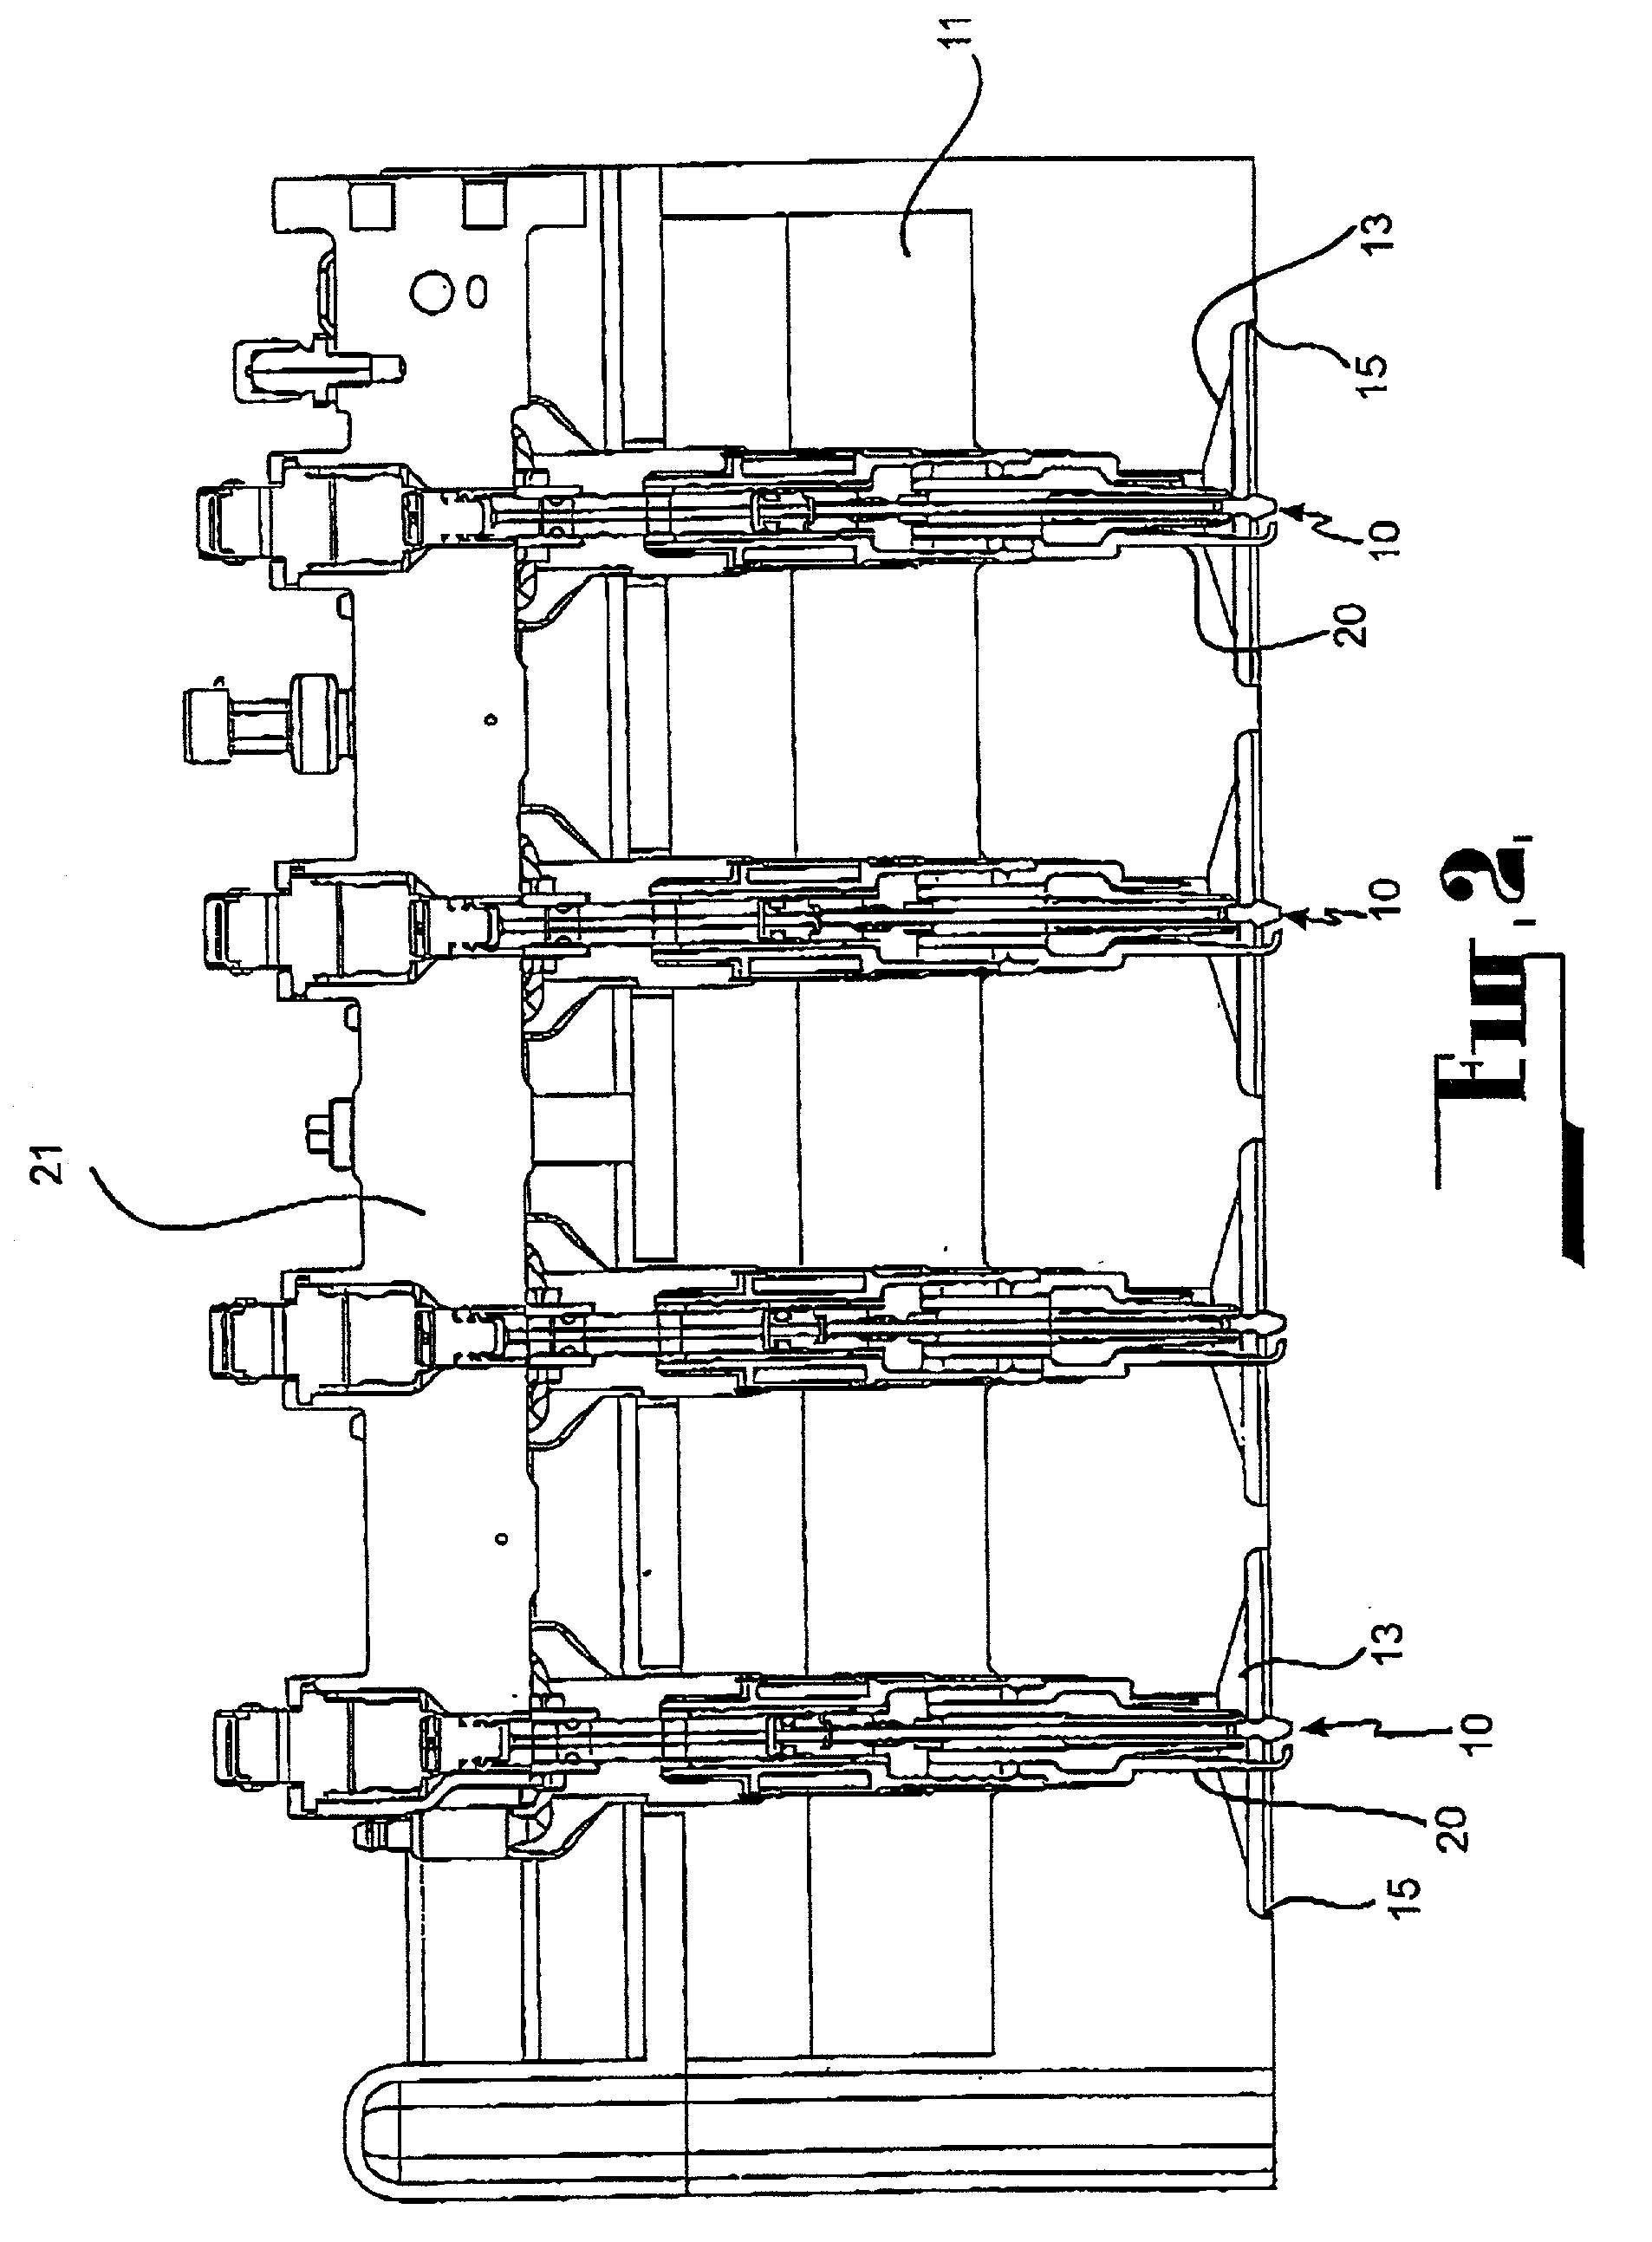 Direct injection of fuels in internal combustion engines